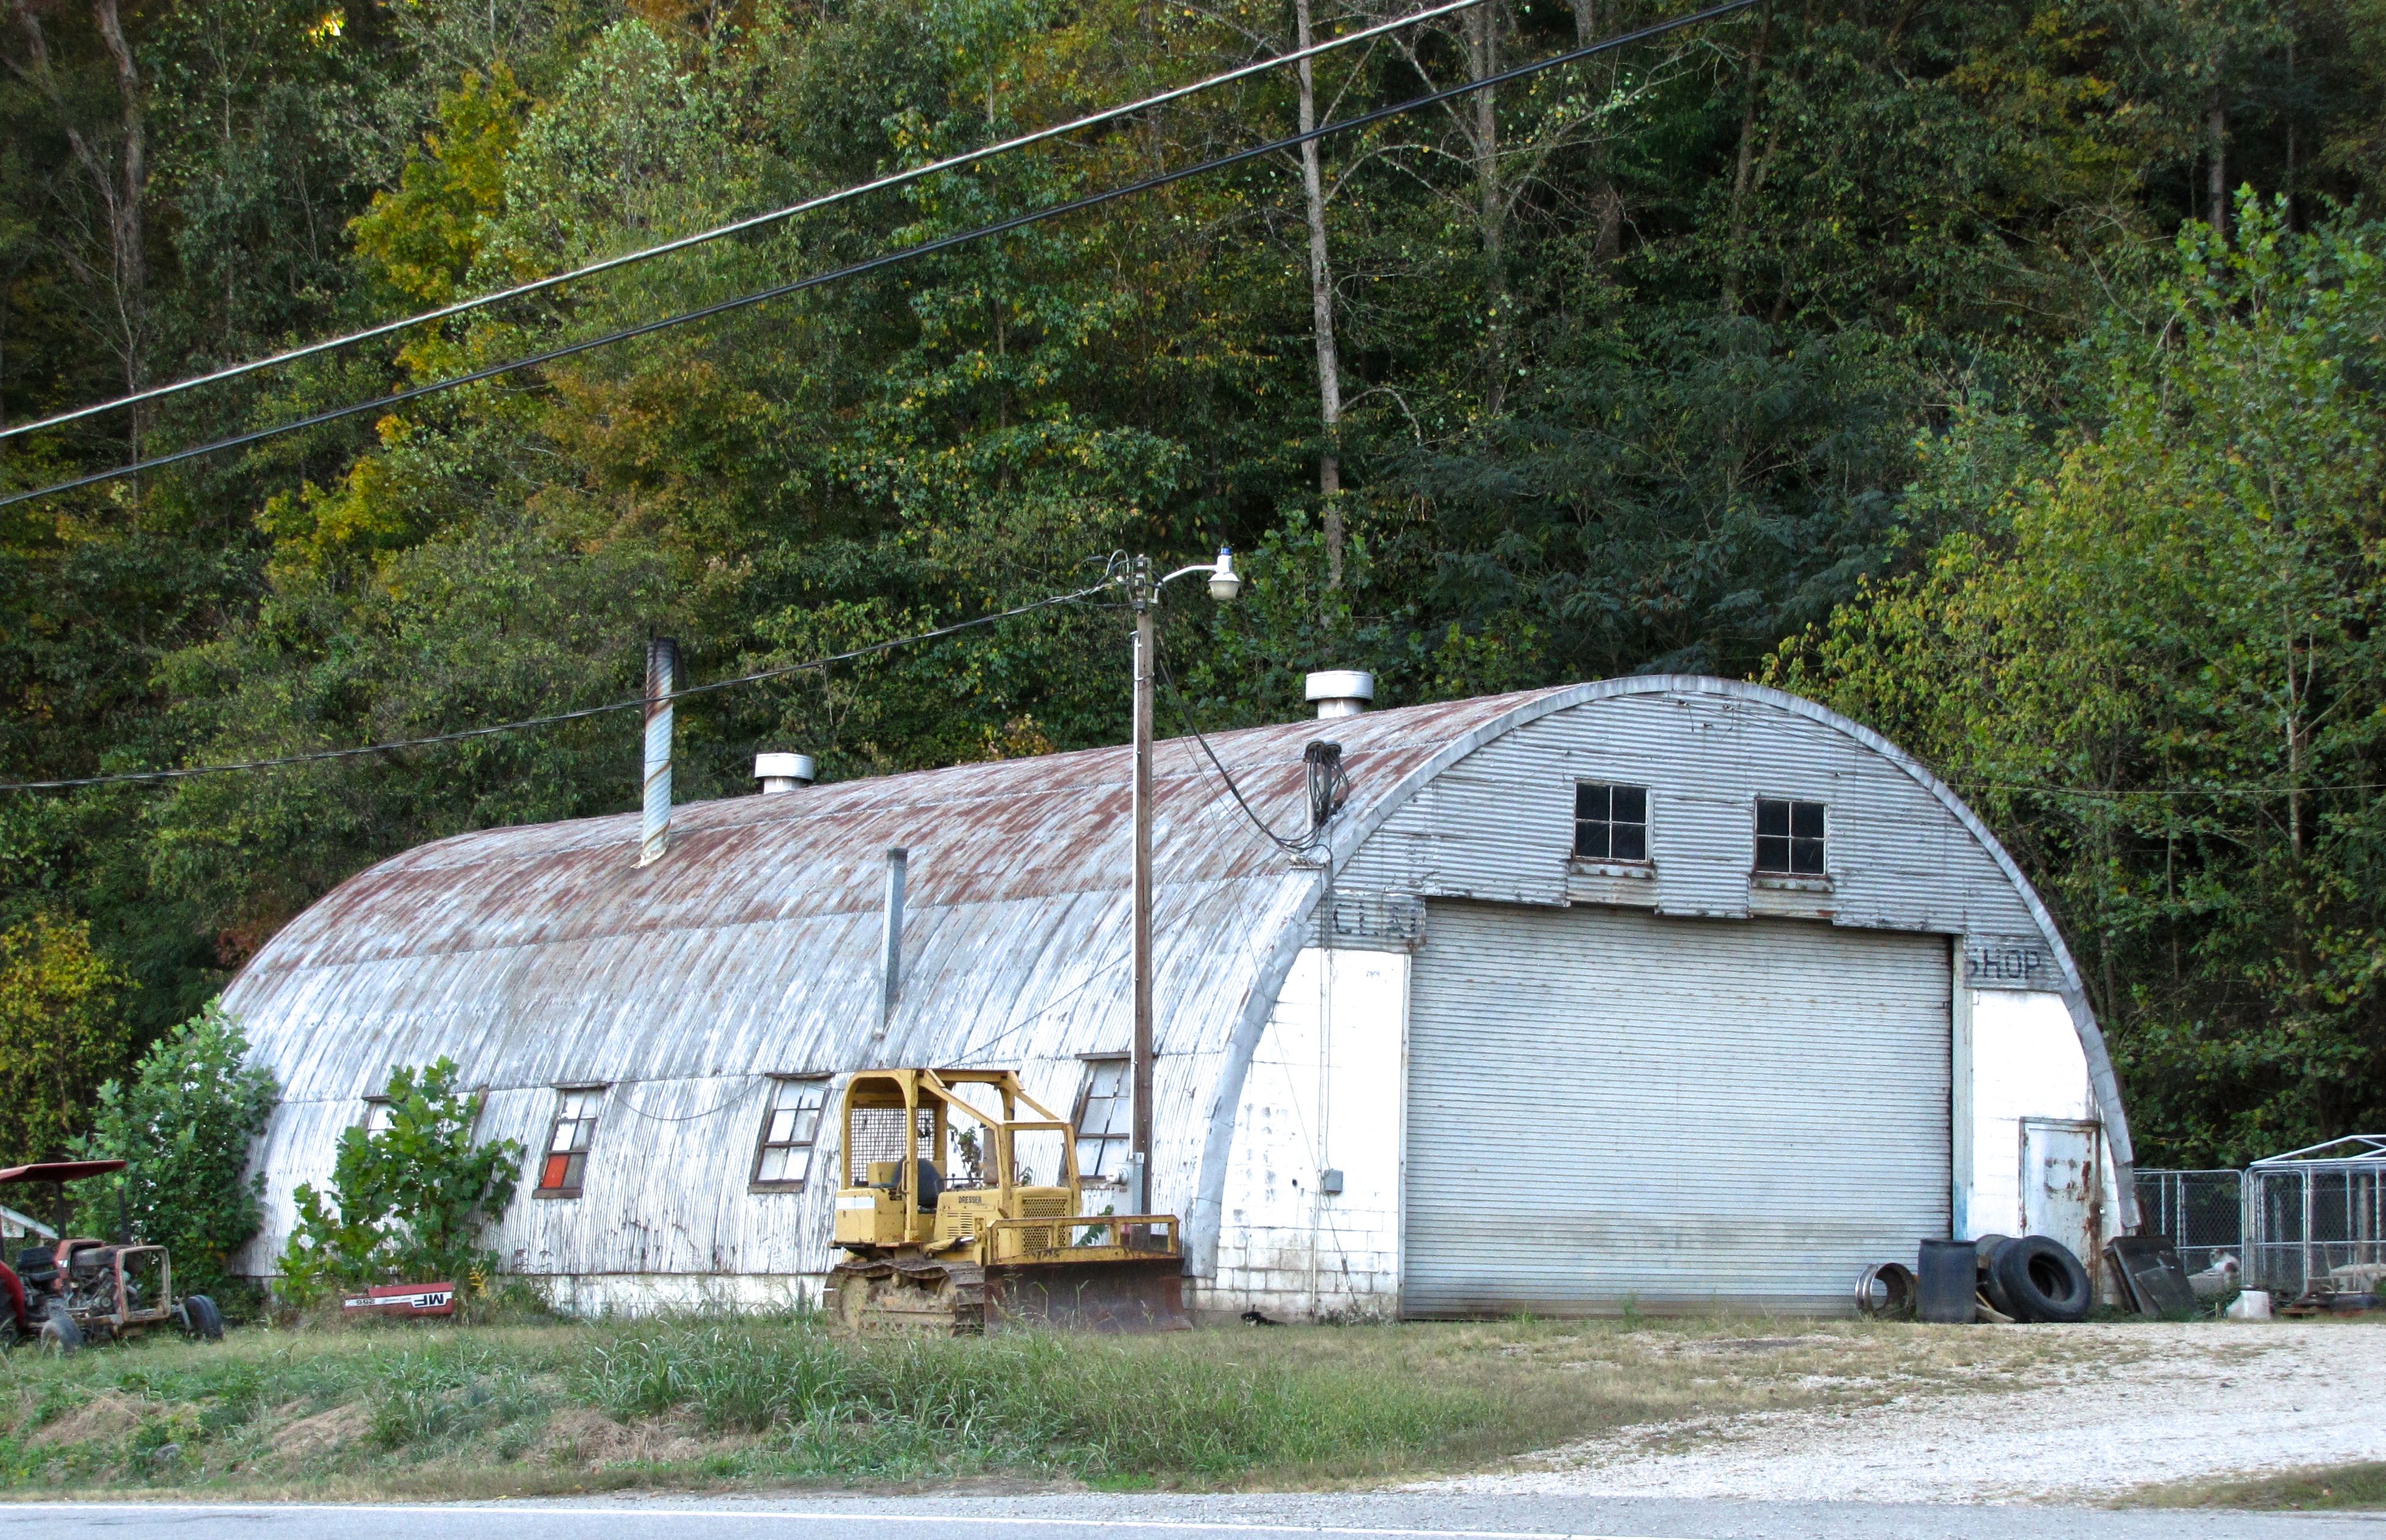 quonset hut in Privacy Policy, OH